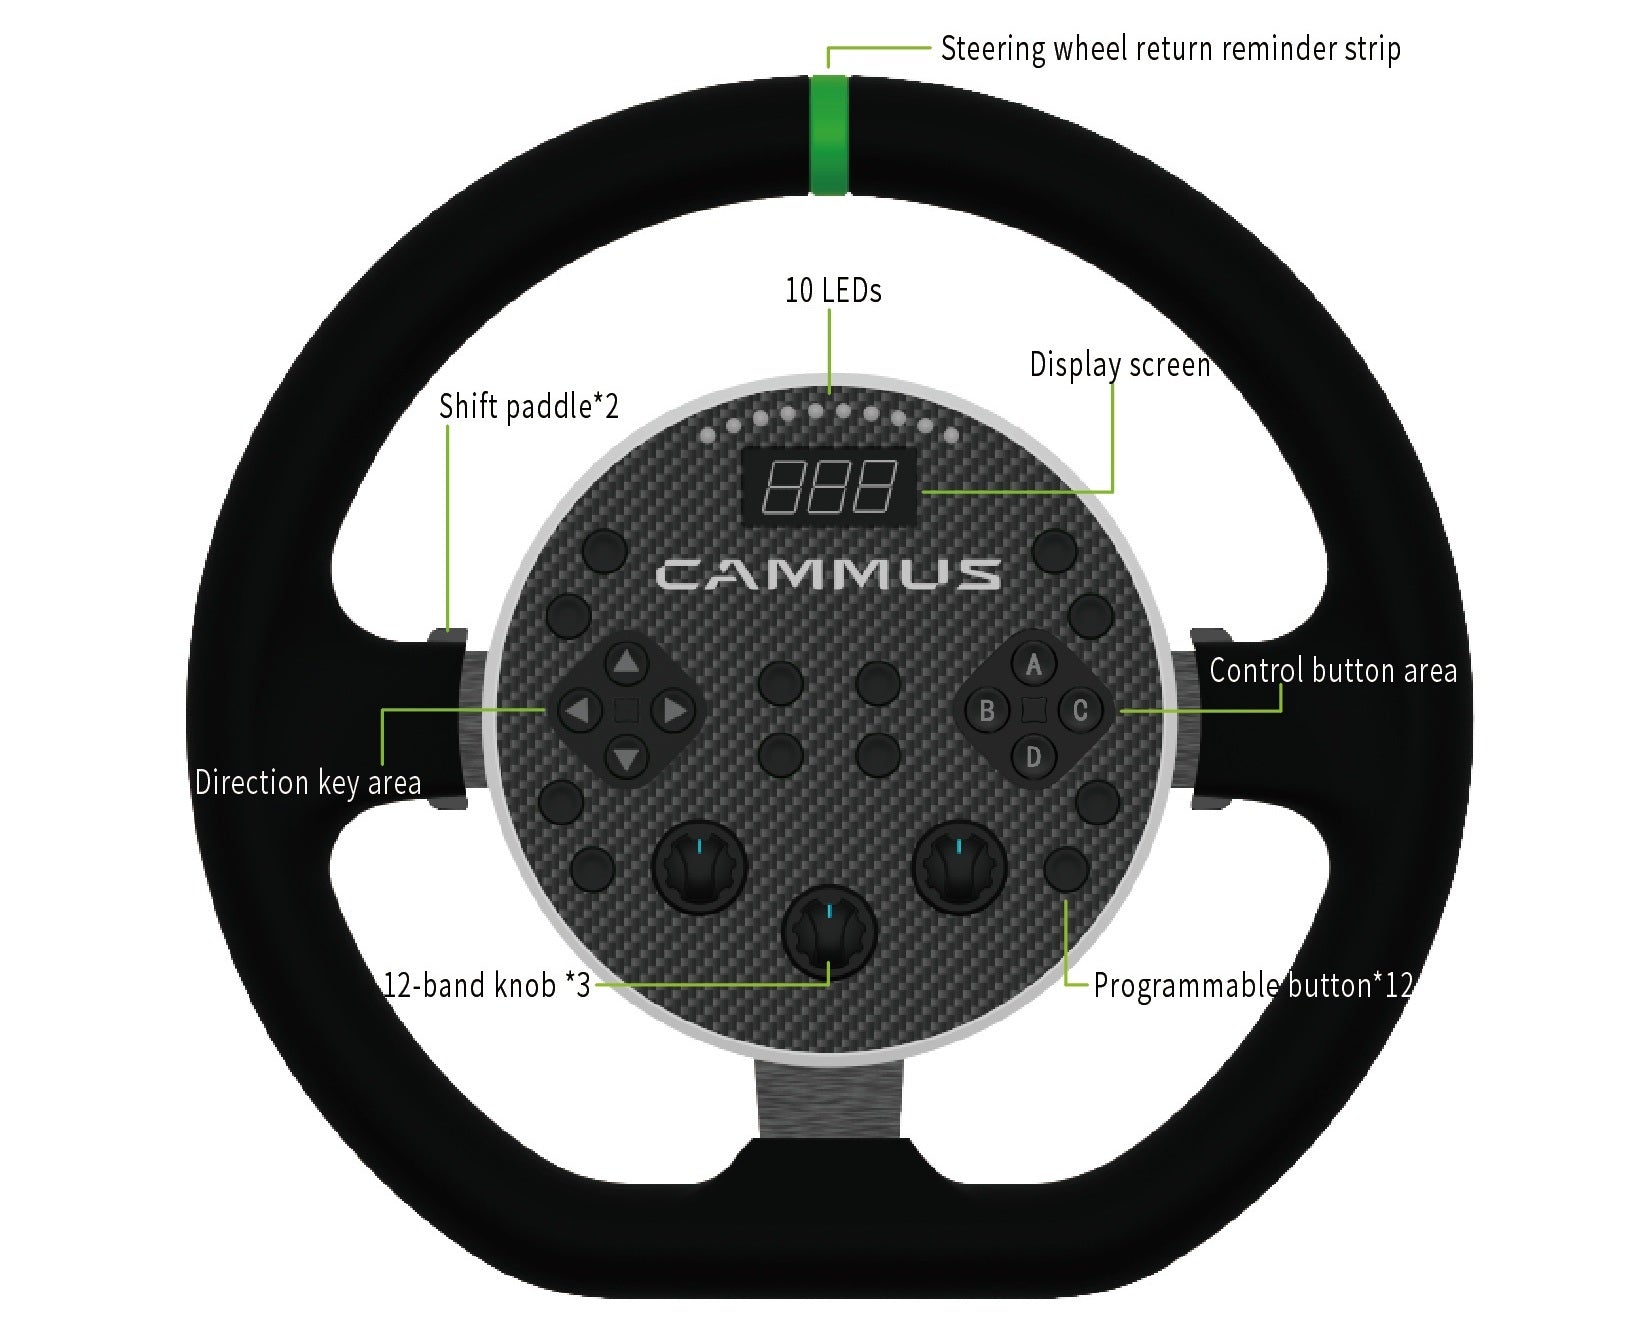 A CAMMUS C5 Direct Drive Base Racing Wheel For PC Games, featuring the word CAMMUS prominently displayed on its steering wheel.